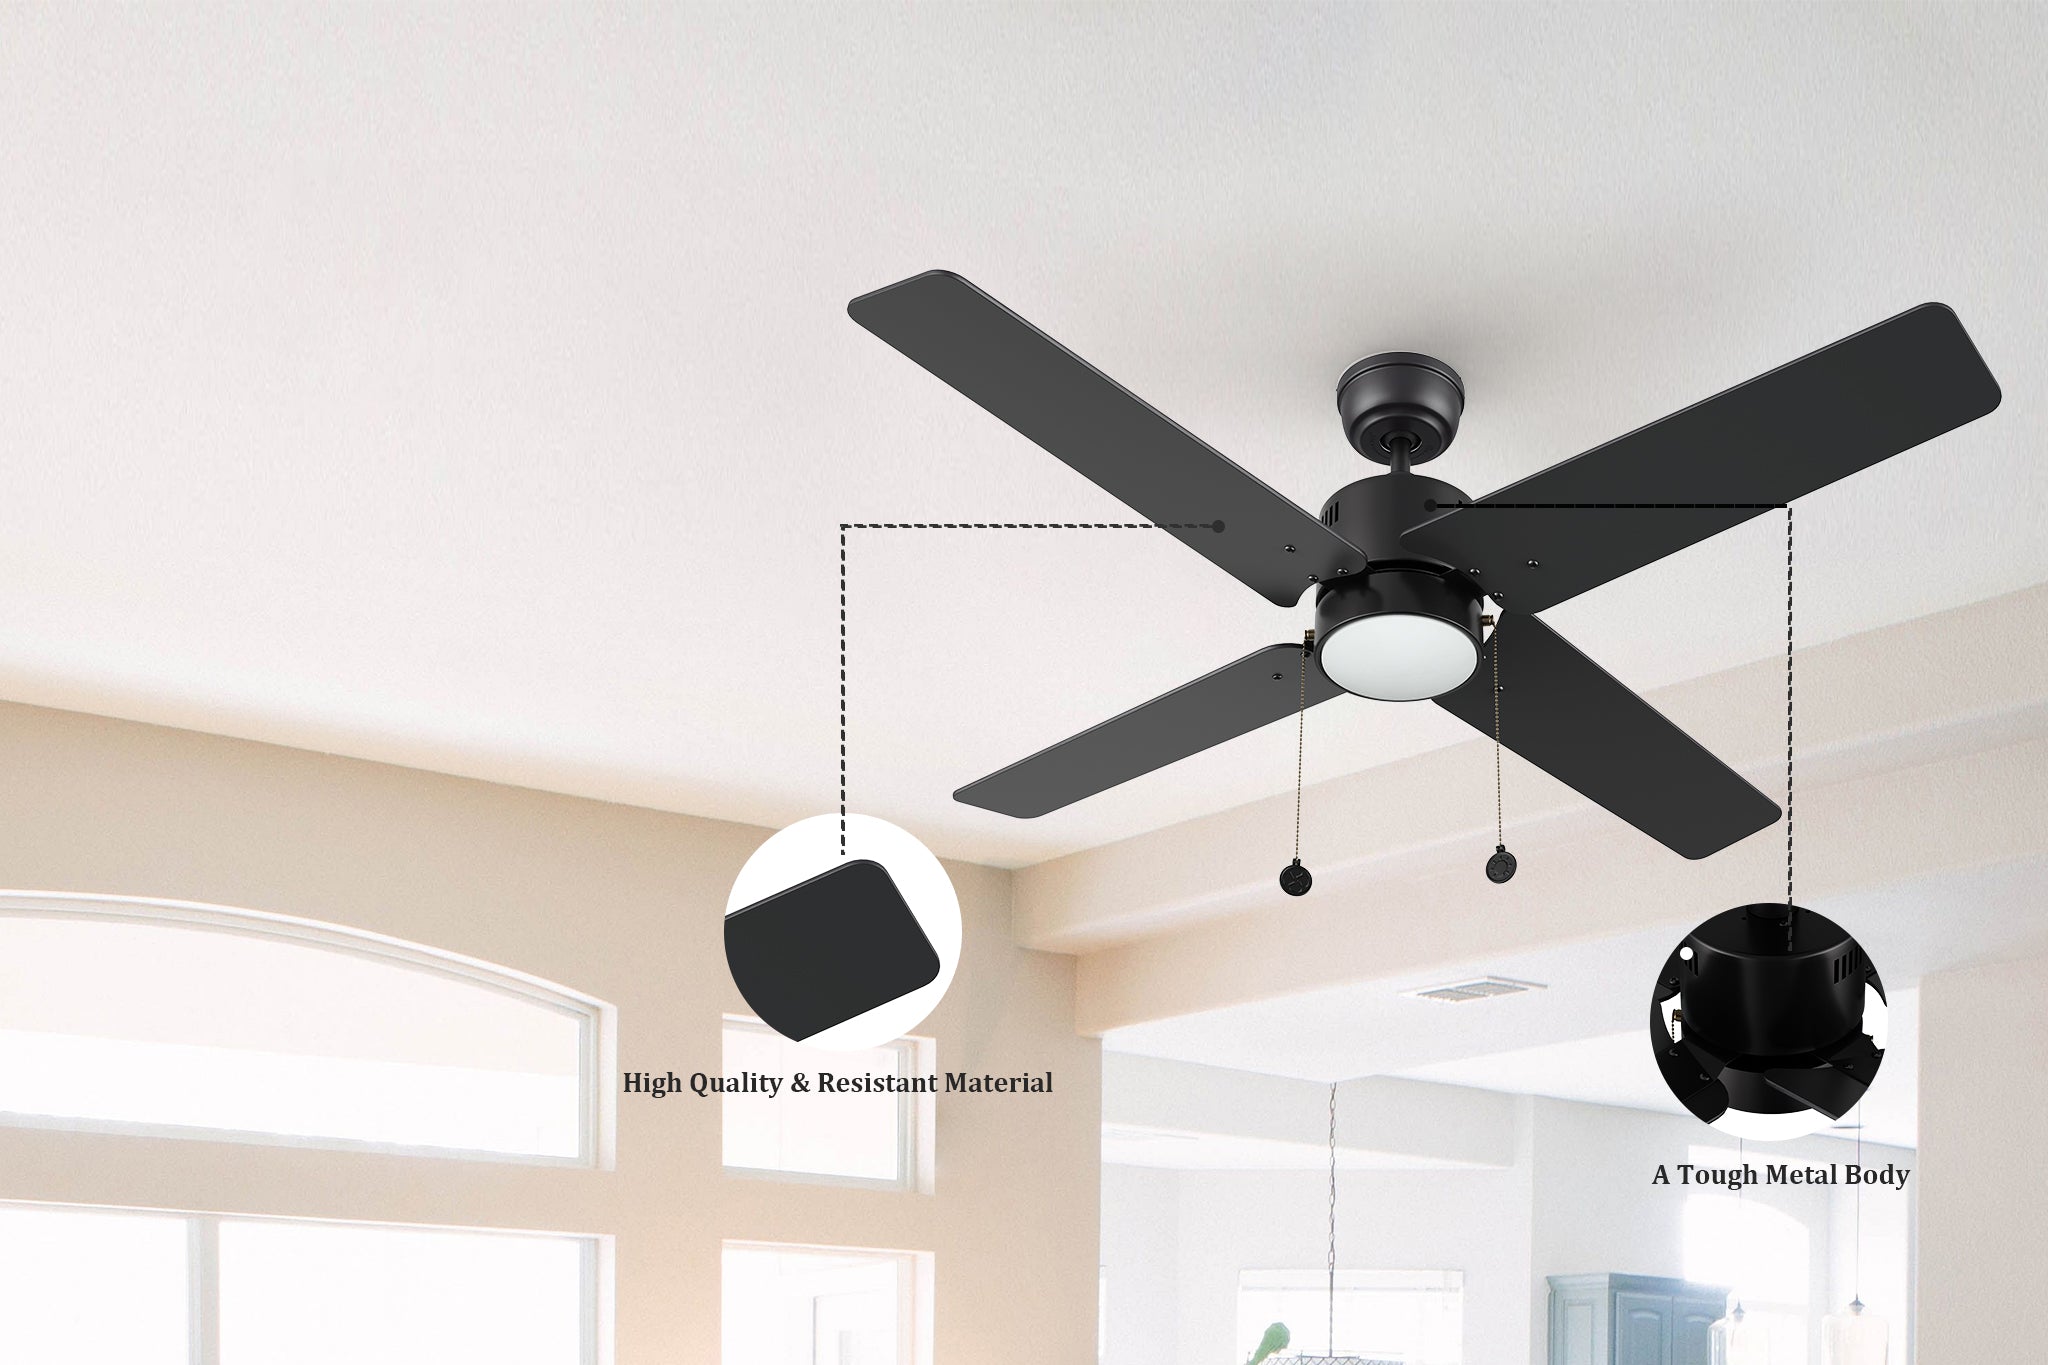 Black ceiling fan with light and high-quality sleek black finish with plywood blades.